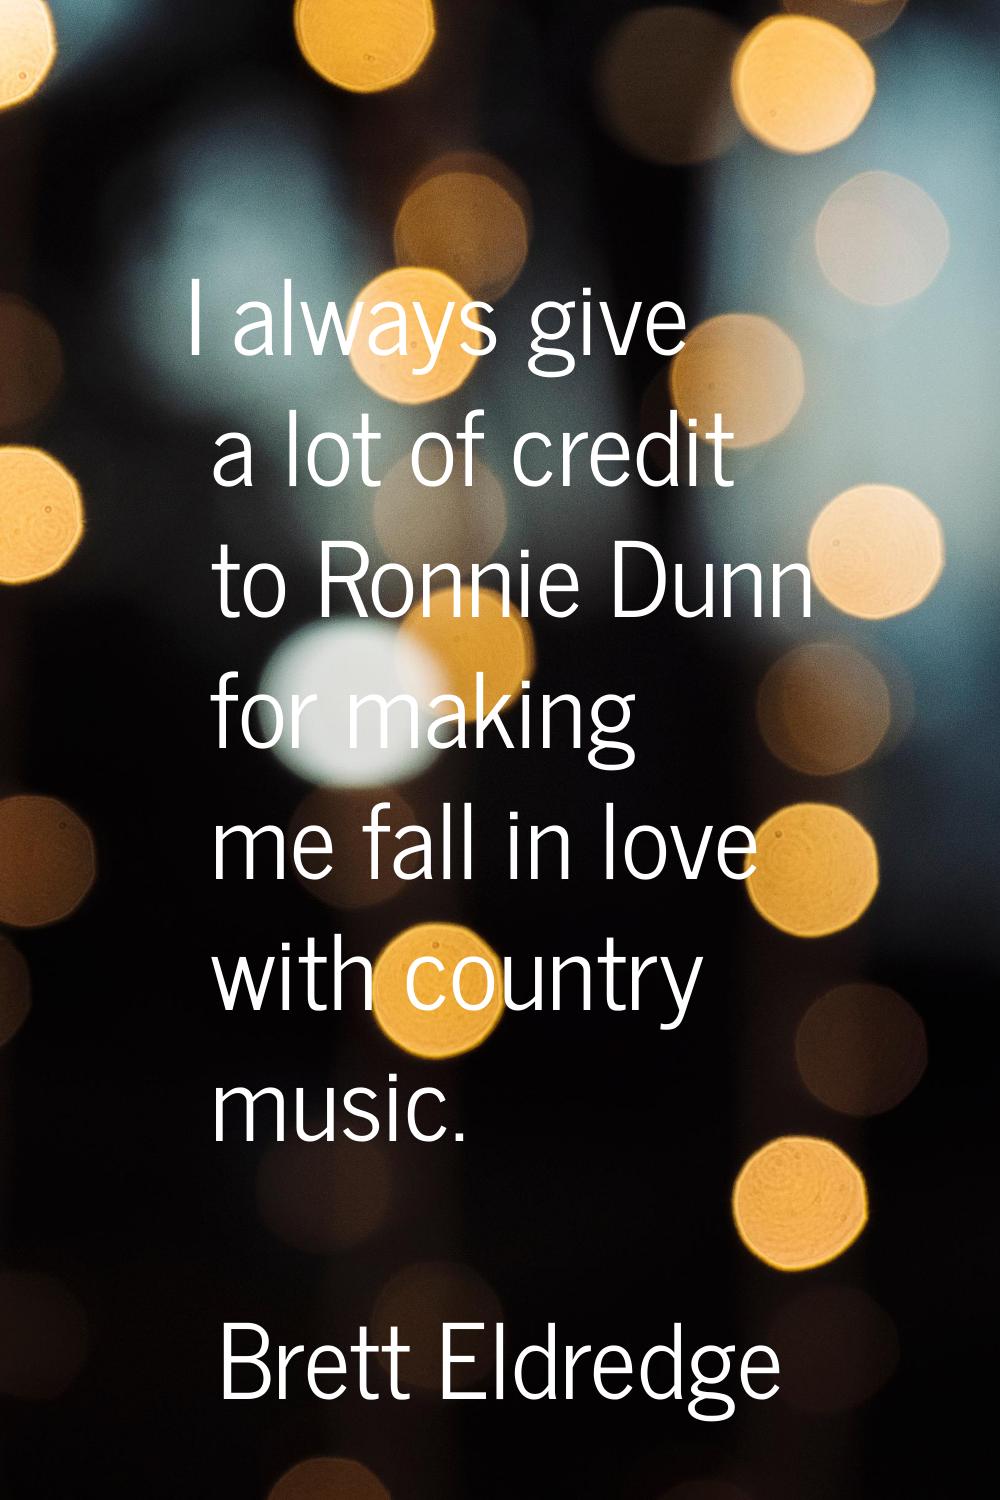 I always give a lot of credit to Ronnie Dunn for making me fall in love with country music.